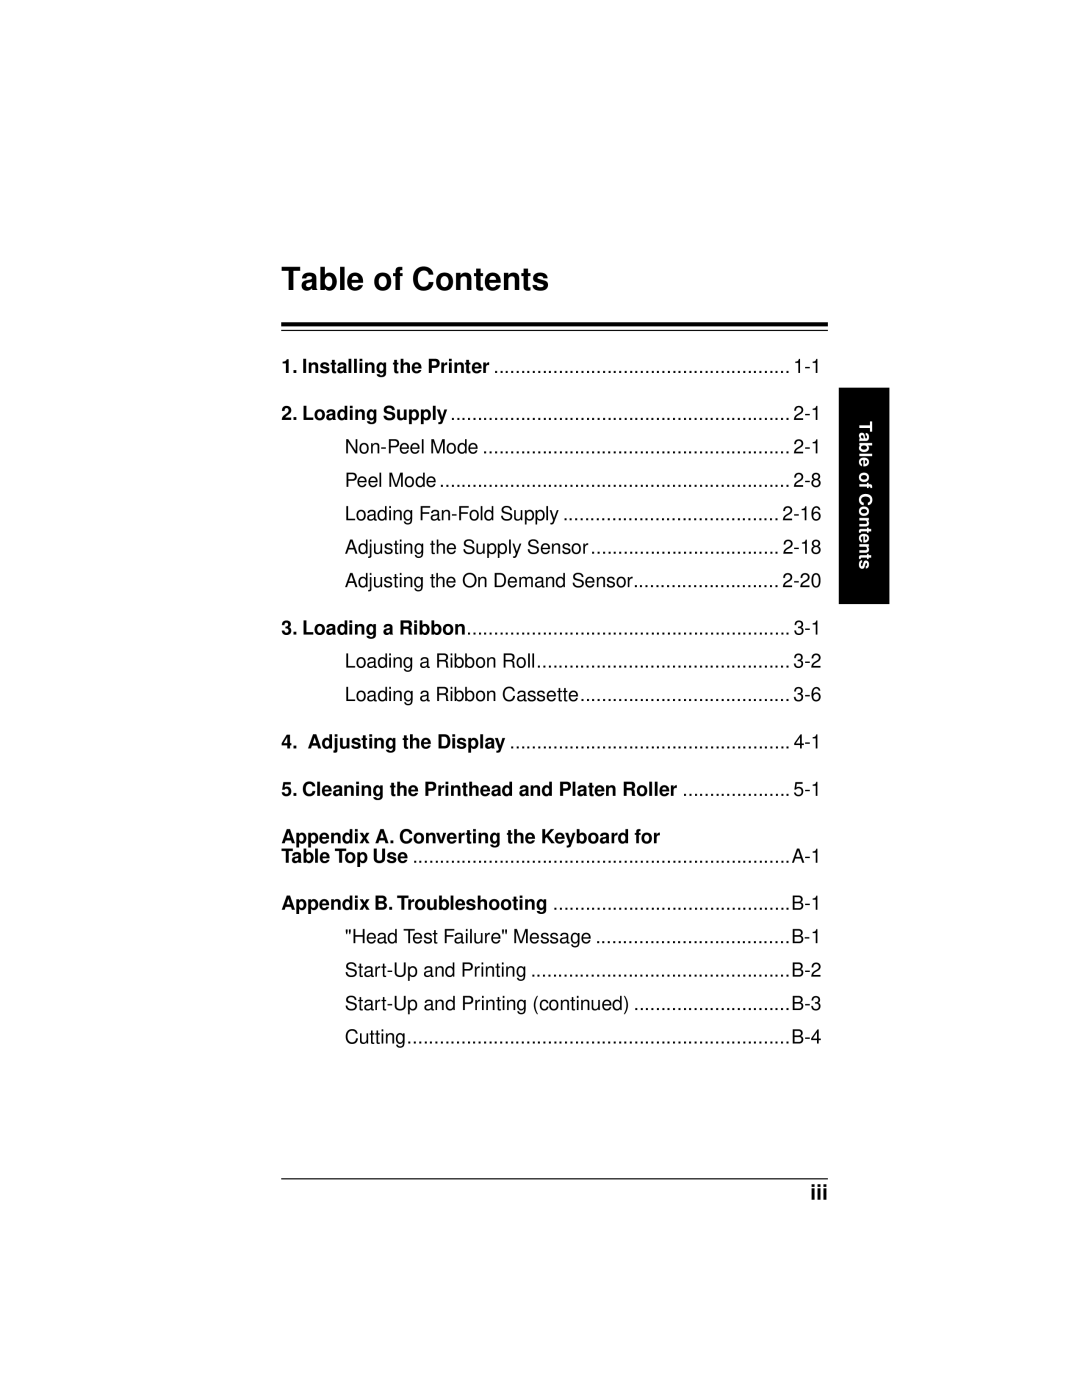 Paxar 9445 manual Table of Contents, Appendix A. Converting the Keyboard for 